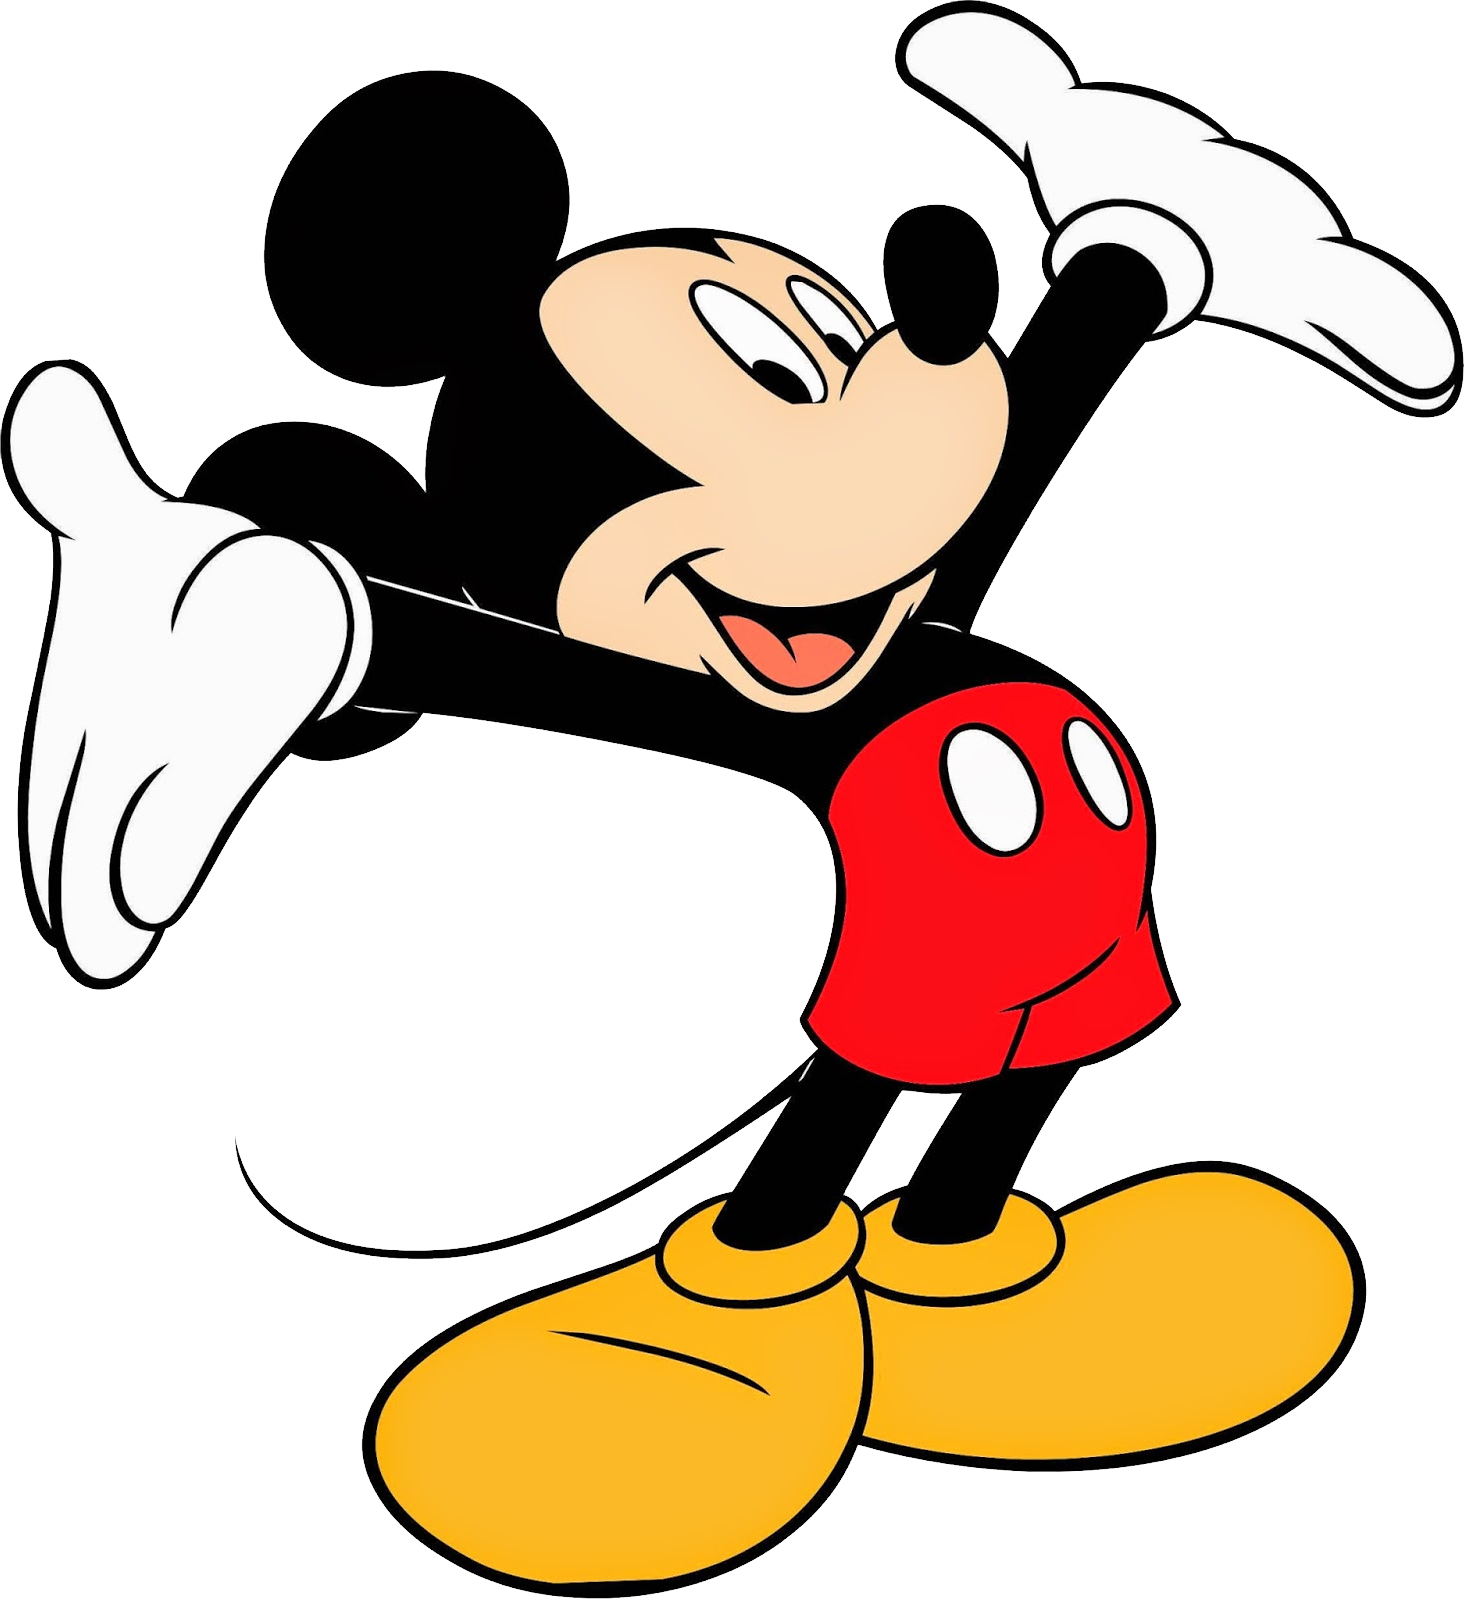 Mickey mouse png images